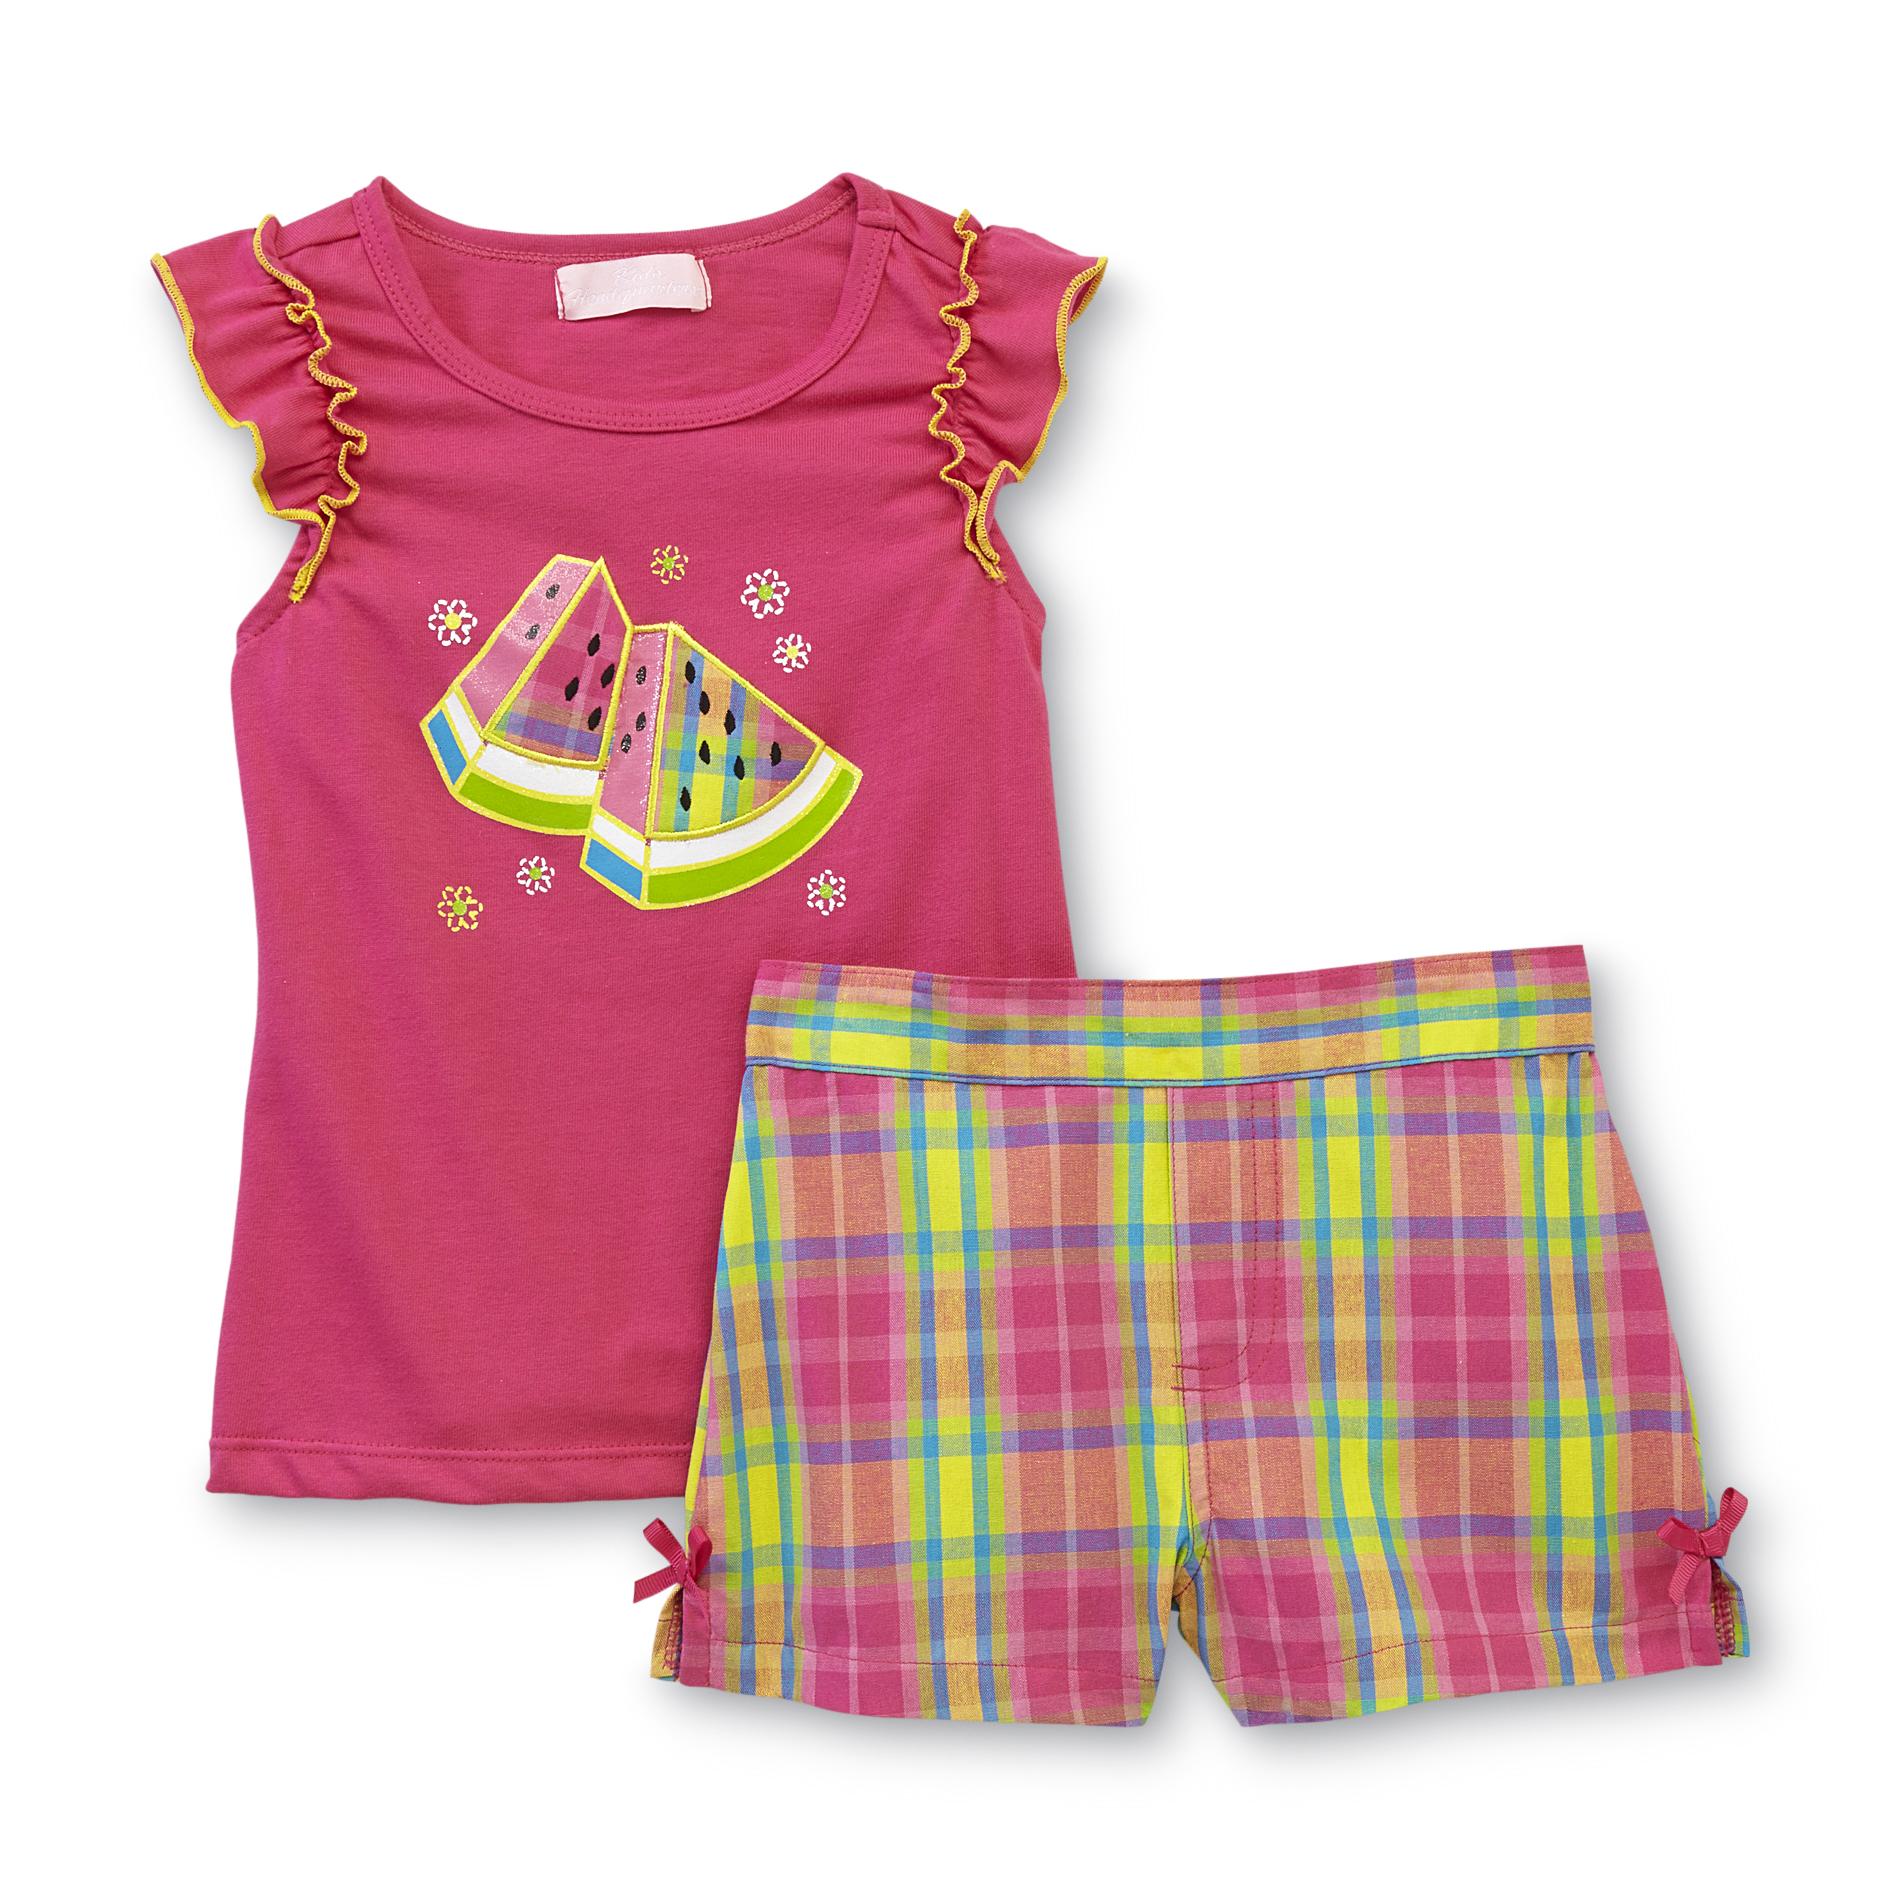 Kids Headquarters Toddler Girl's Top & Shorts - Watermelon & Plaid